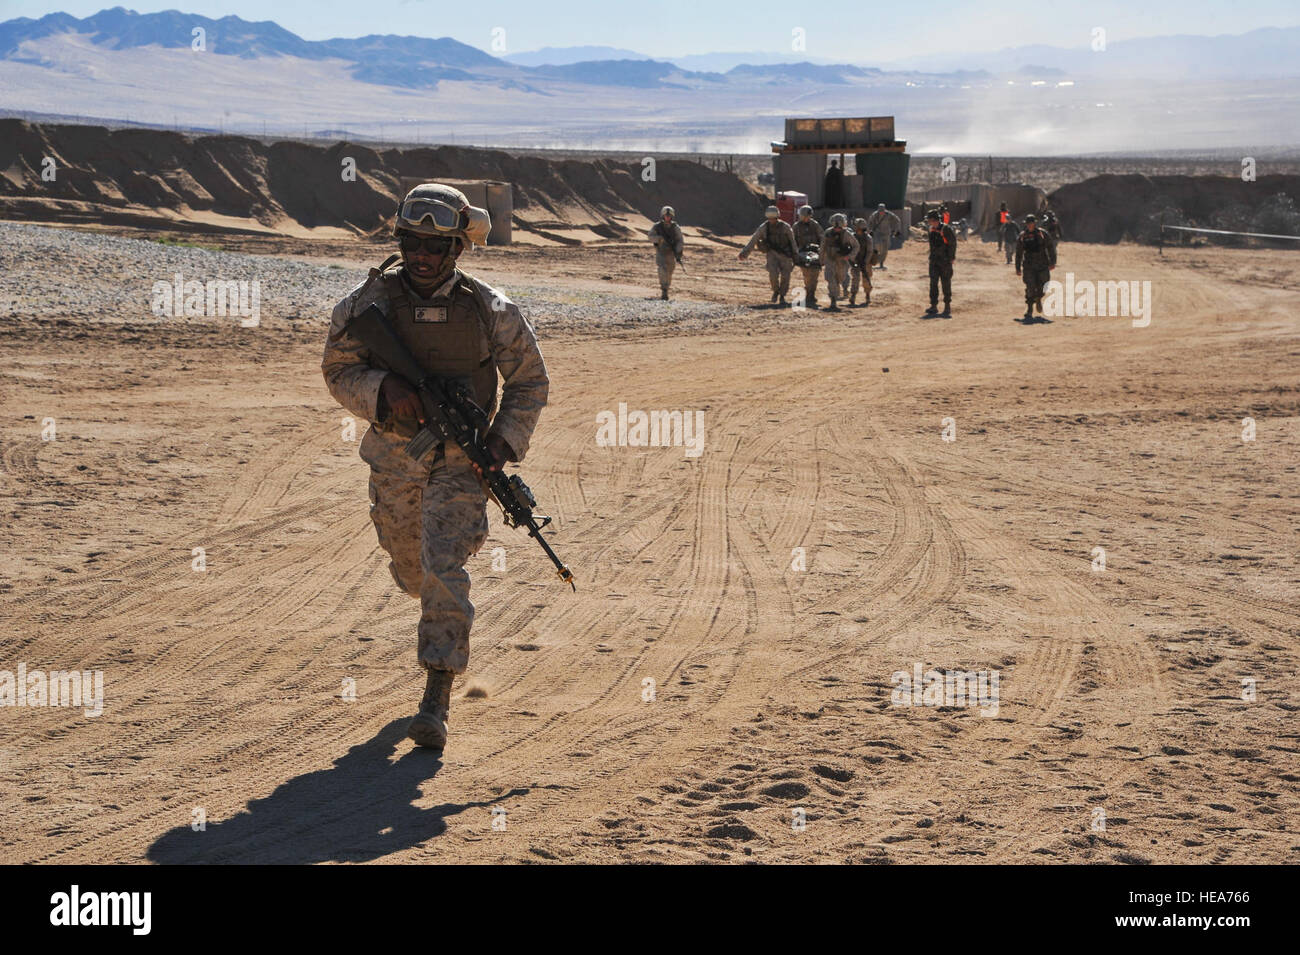 U.S. Marines participate in patient transport during Integrated Training Exercise 2-15 at Marine Corps Air Ground Combat Center Twentynine Palms (MCAGCC), Calif., Feb. 11, 2015. MCAGCC conducts relevant live-fire combined arms training, urban operations, and joint/coalition level integration training that promotes operational forces' readiness.  Tech. Sgt. Joselito Aribuabo Stock Photo